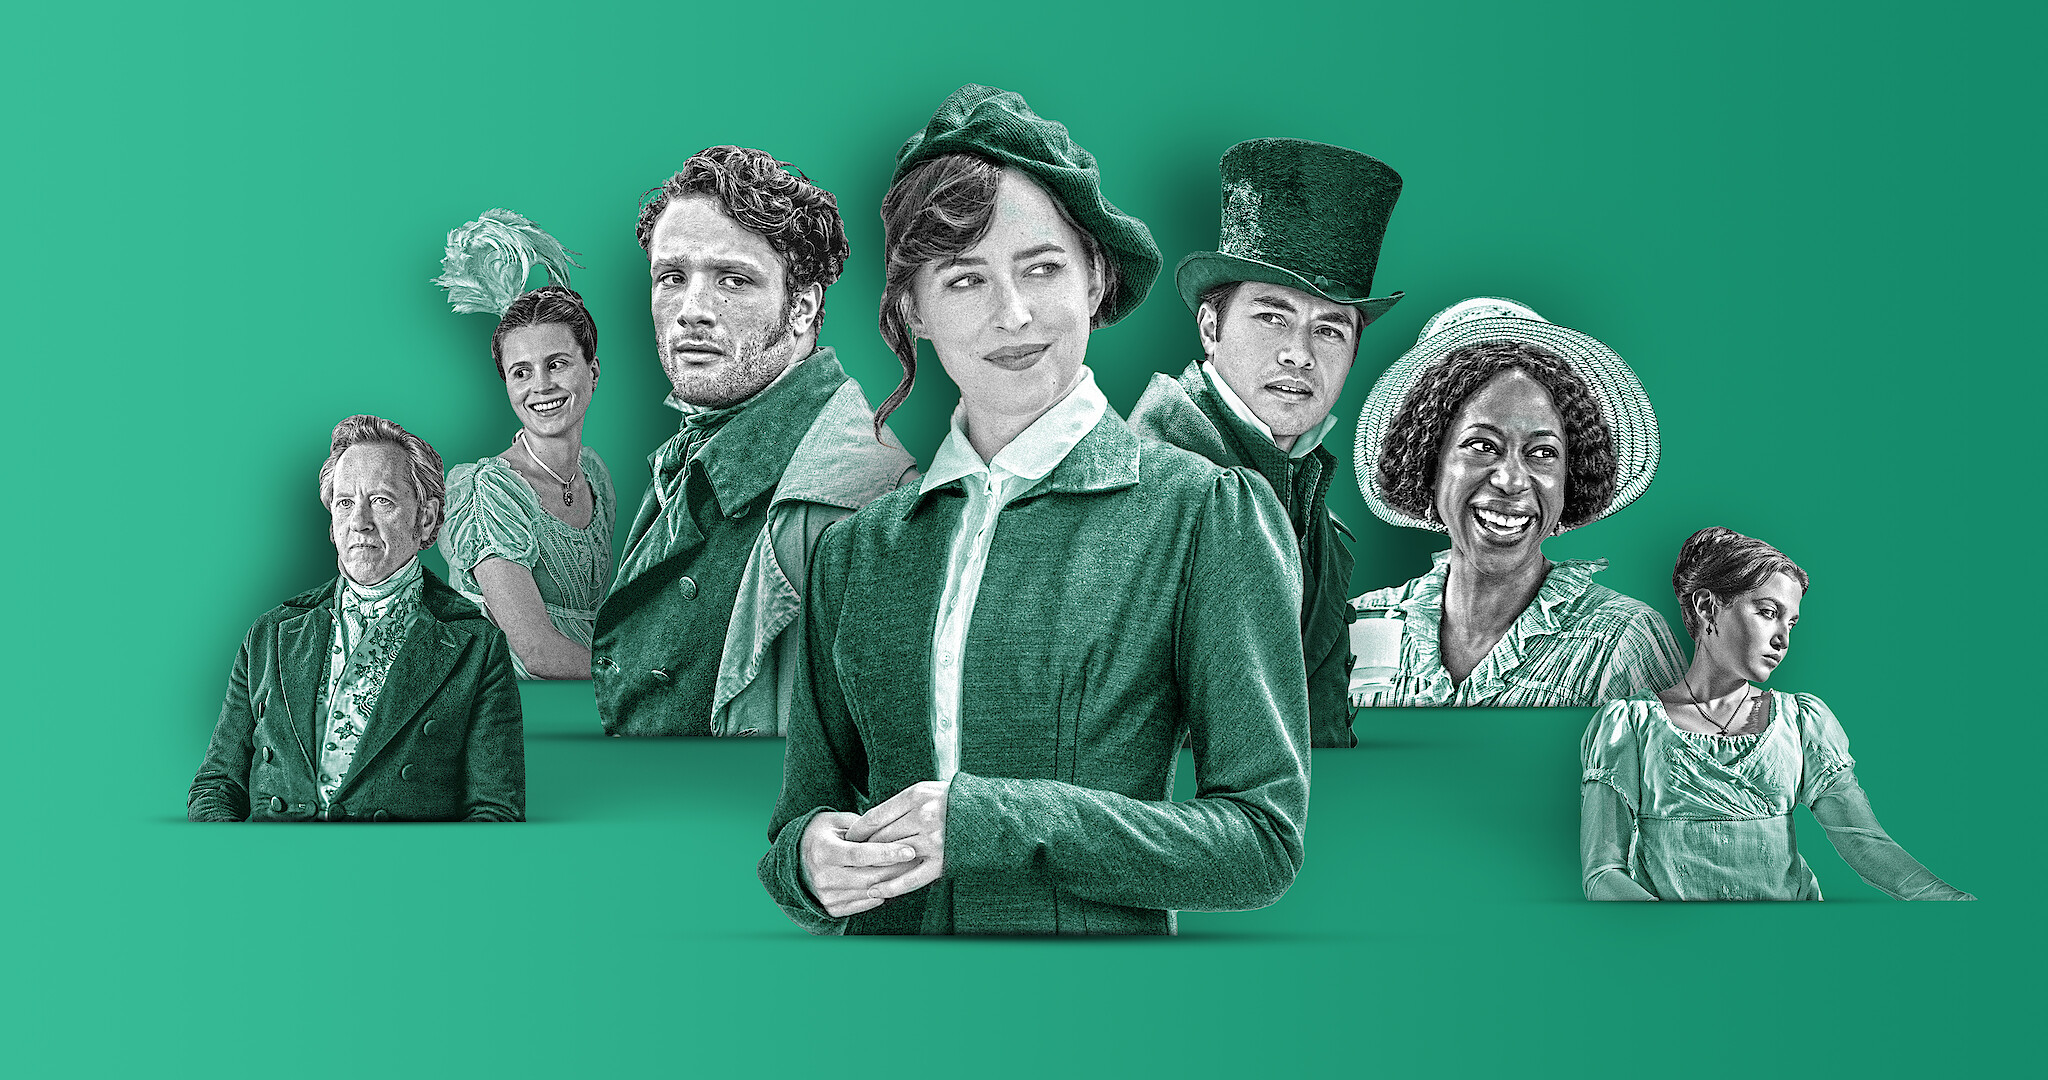 Whos Who In Persuasion? Cast Guide to Netflix Jane Austen Movie pic